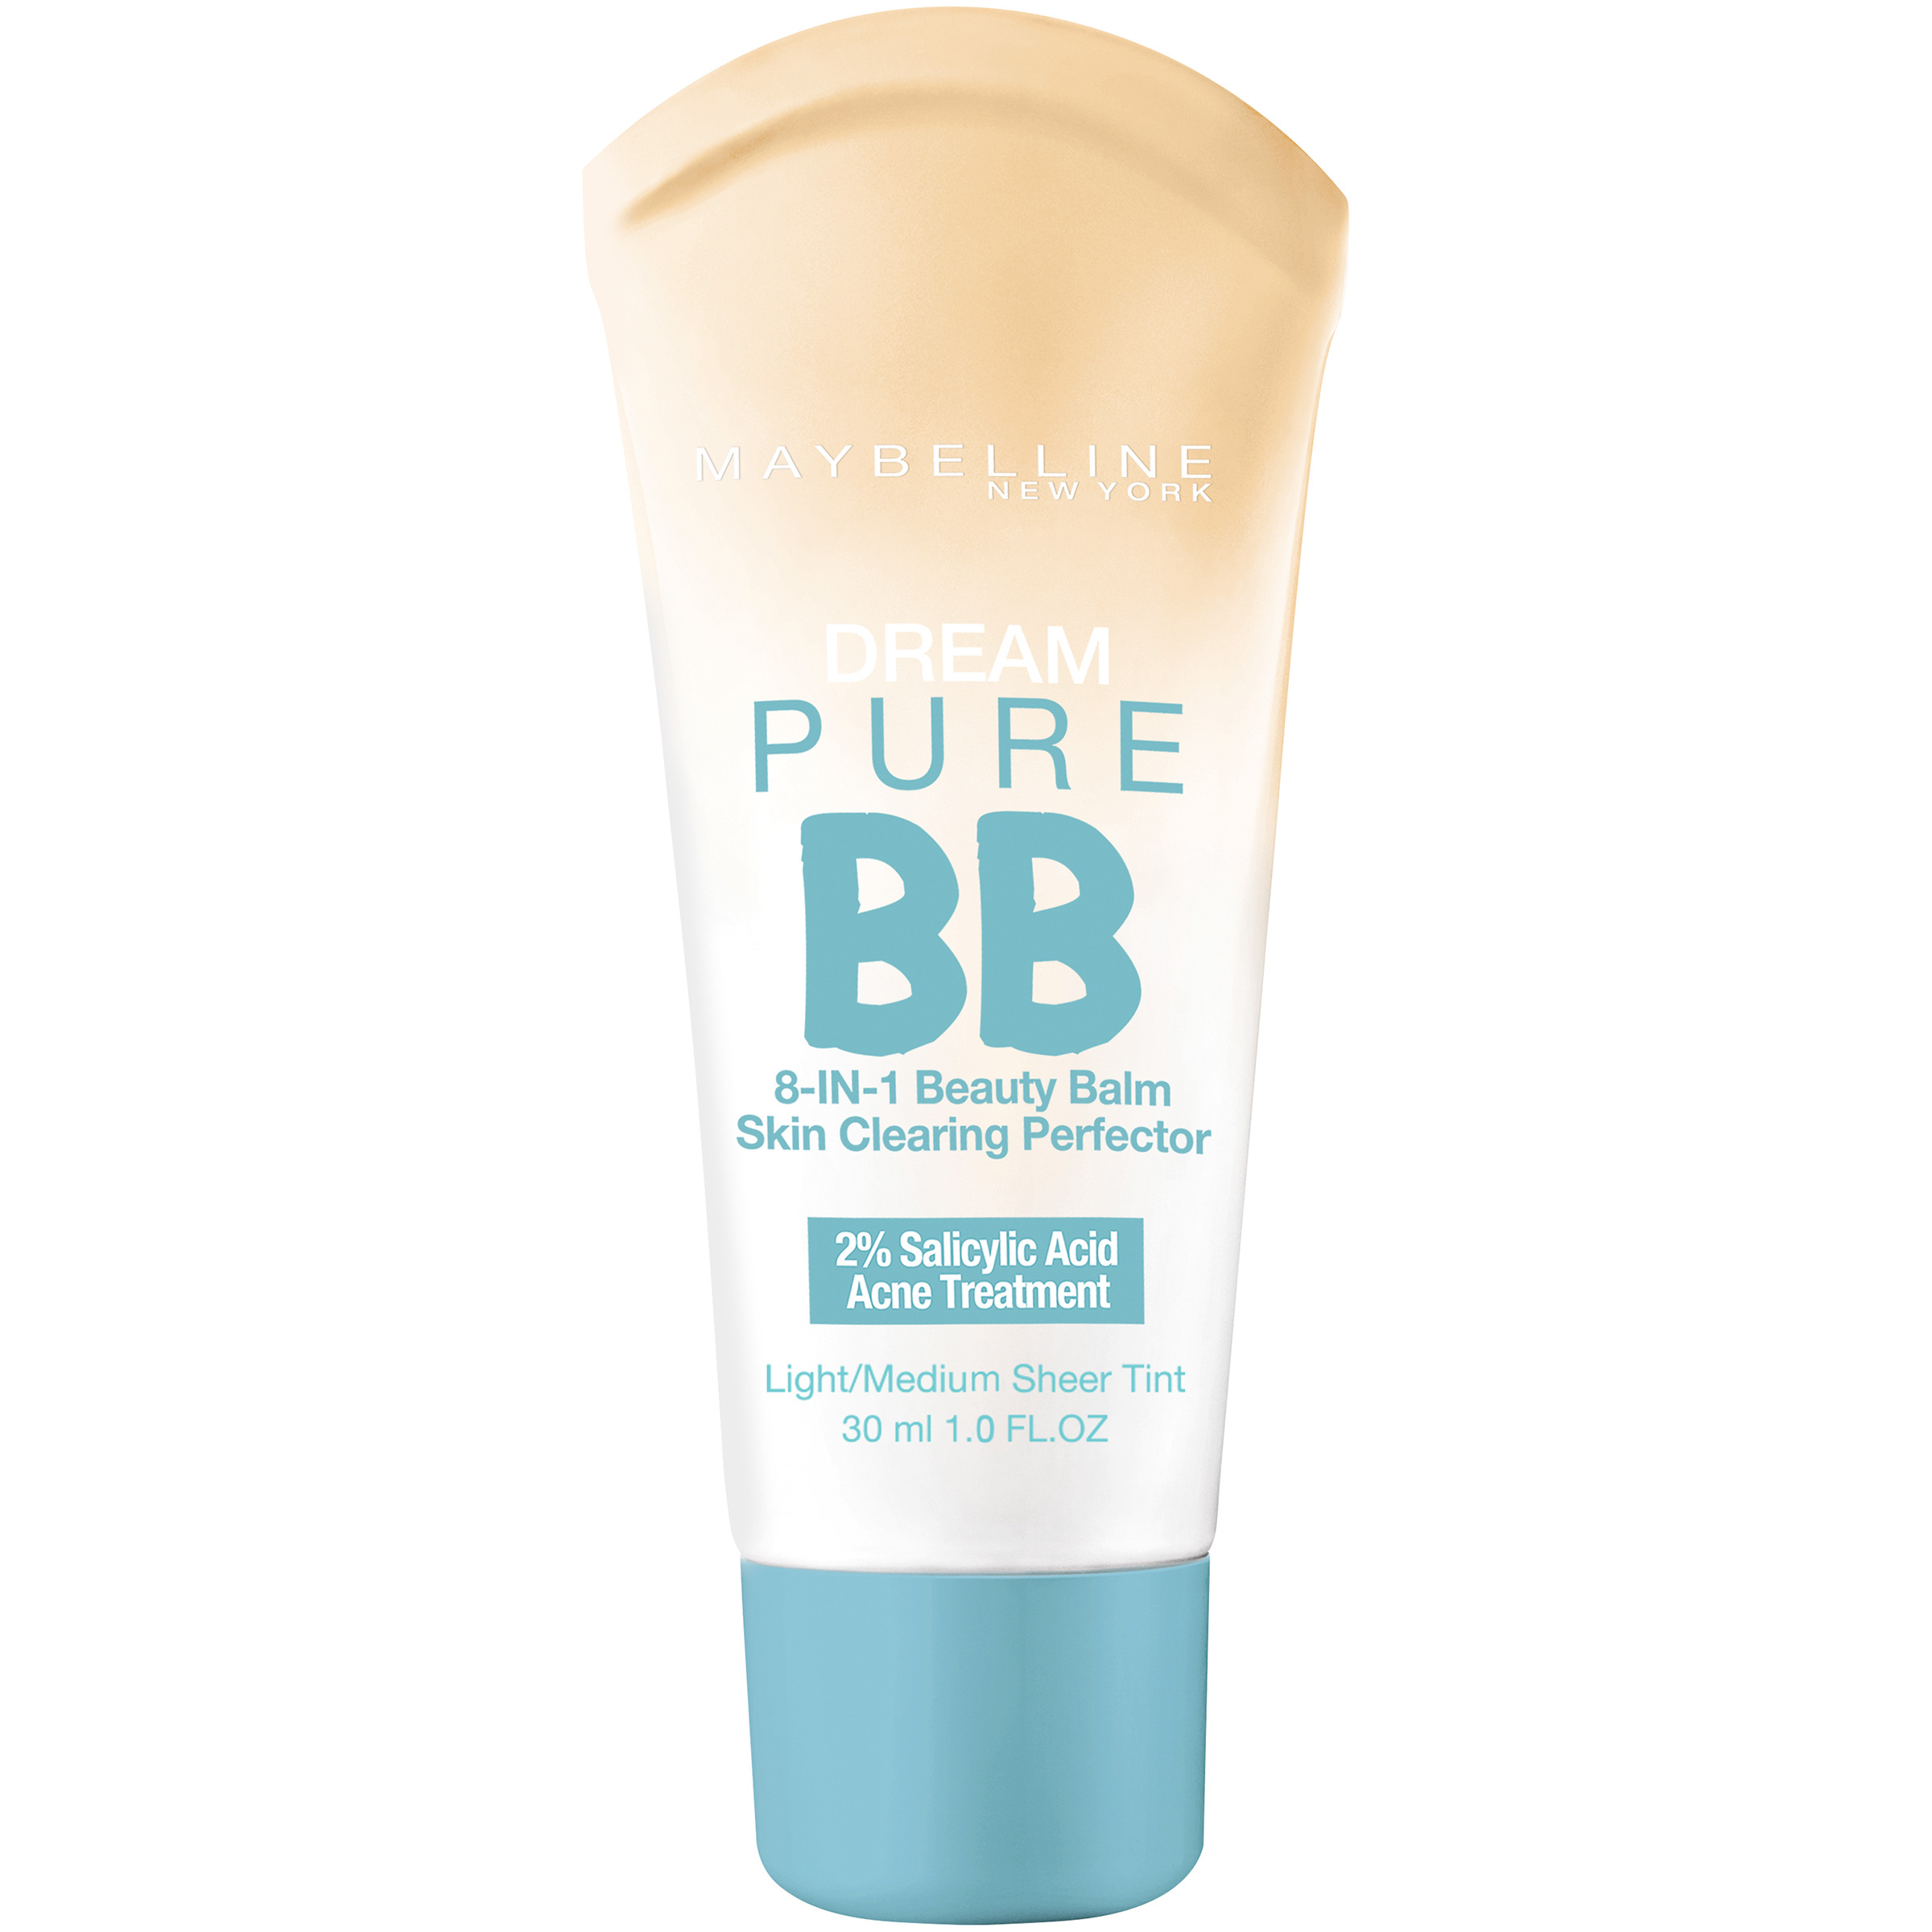 Maybelline New York Pure BB&#8482; Cream Skin Clearing Perfector